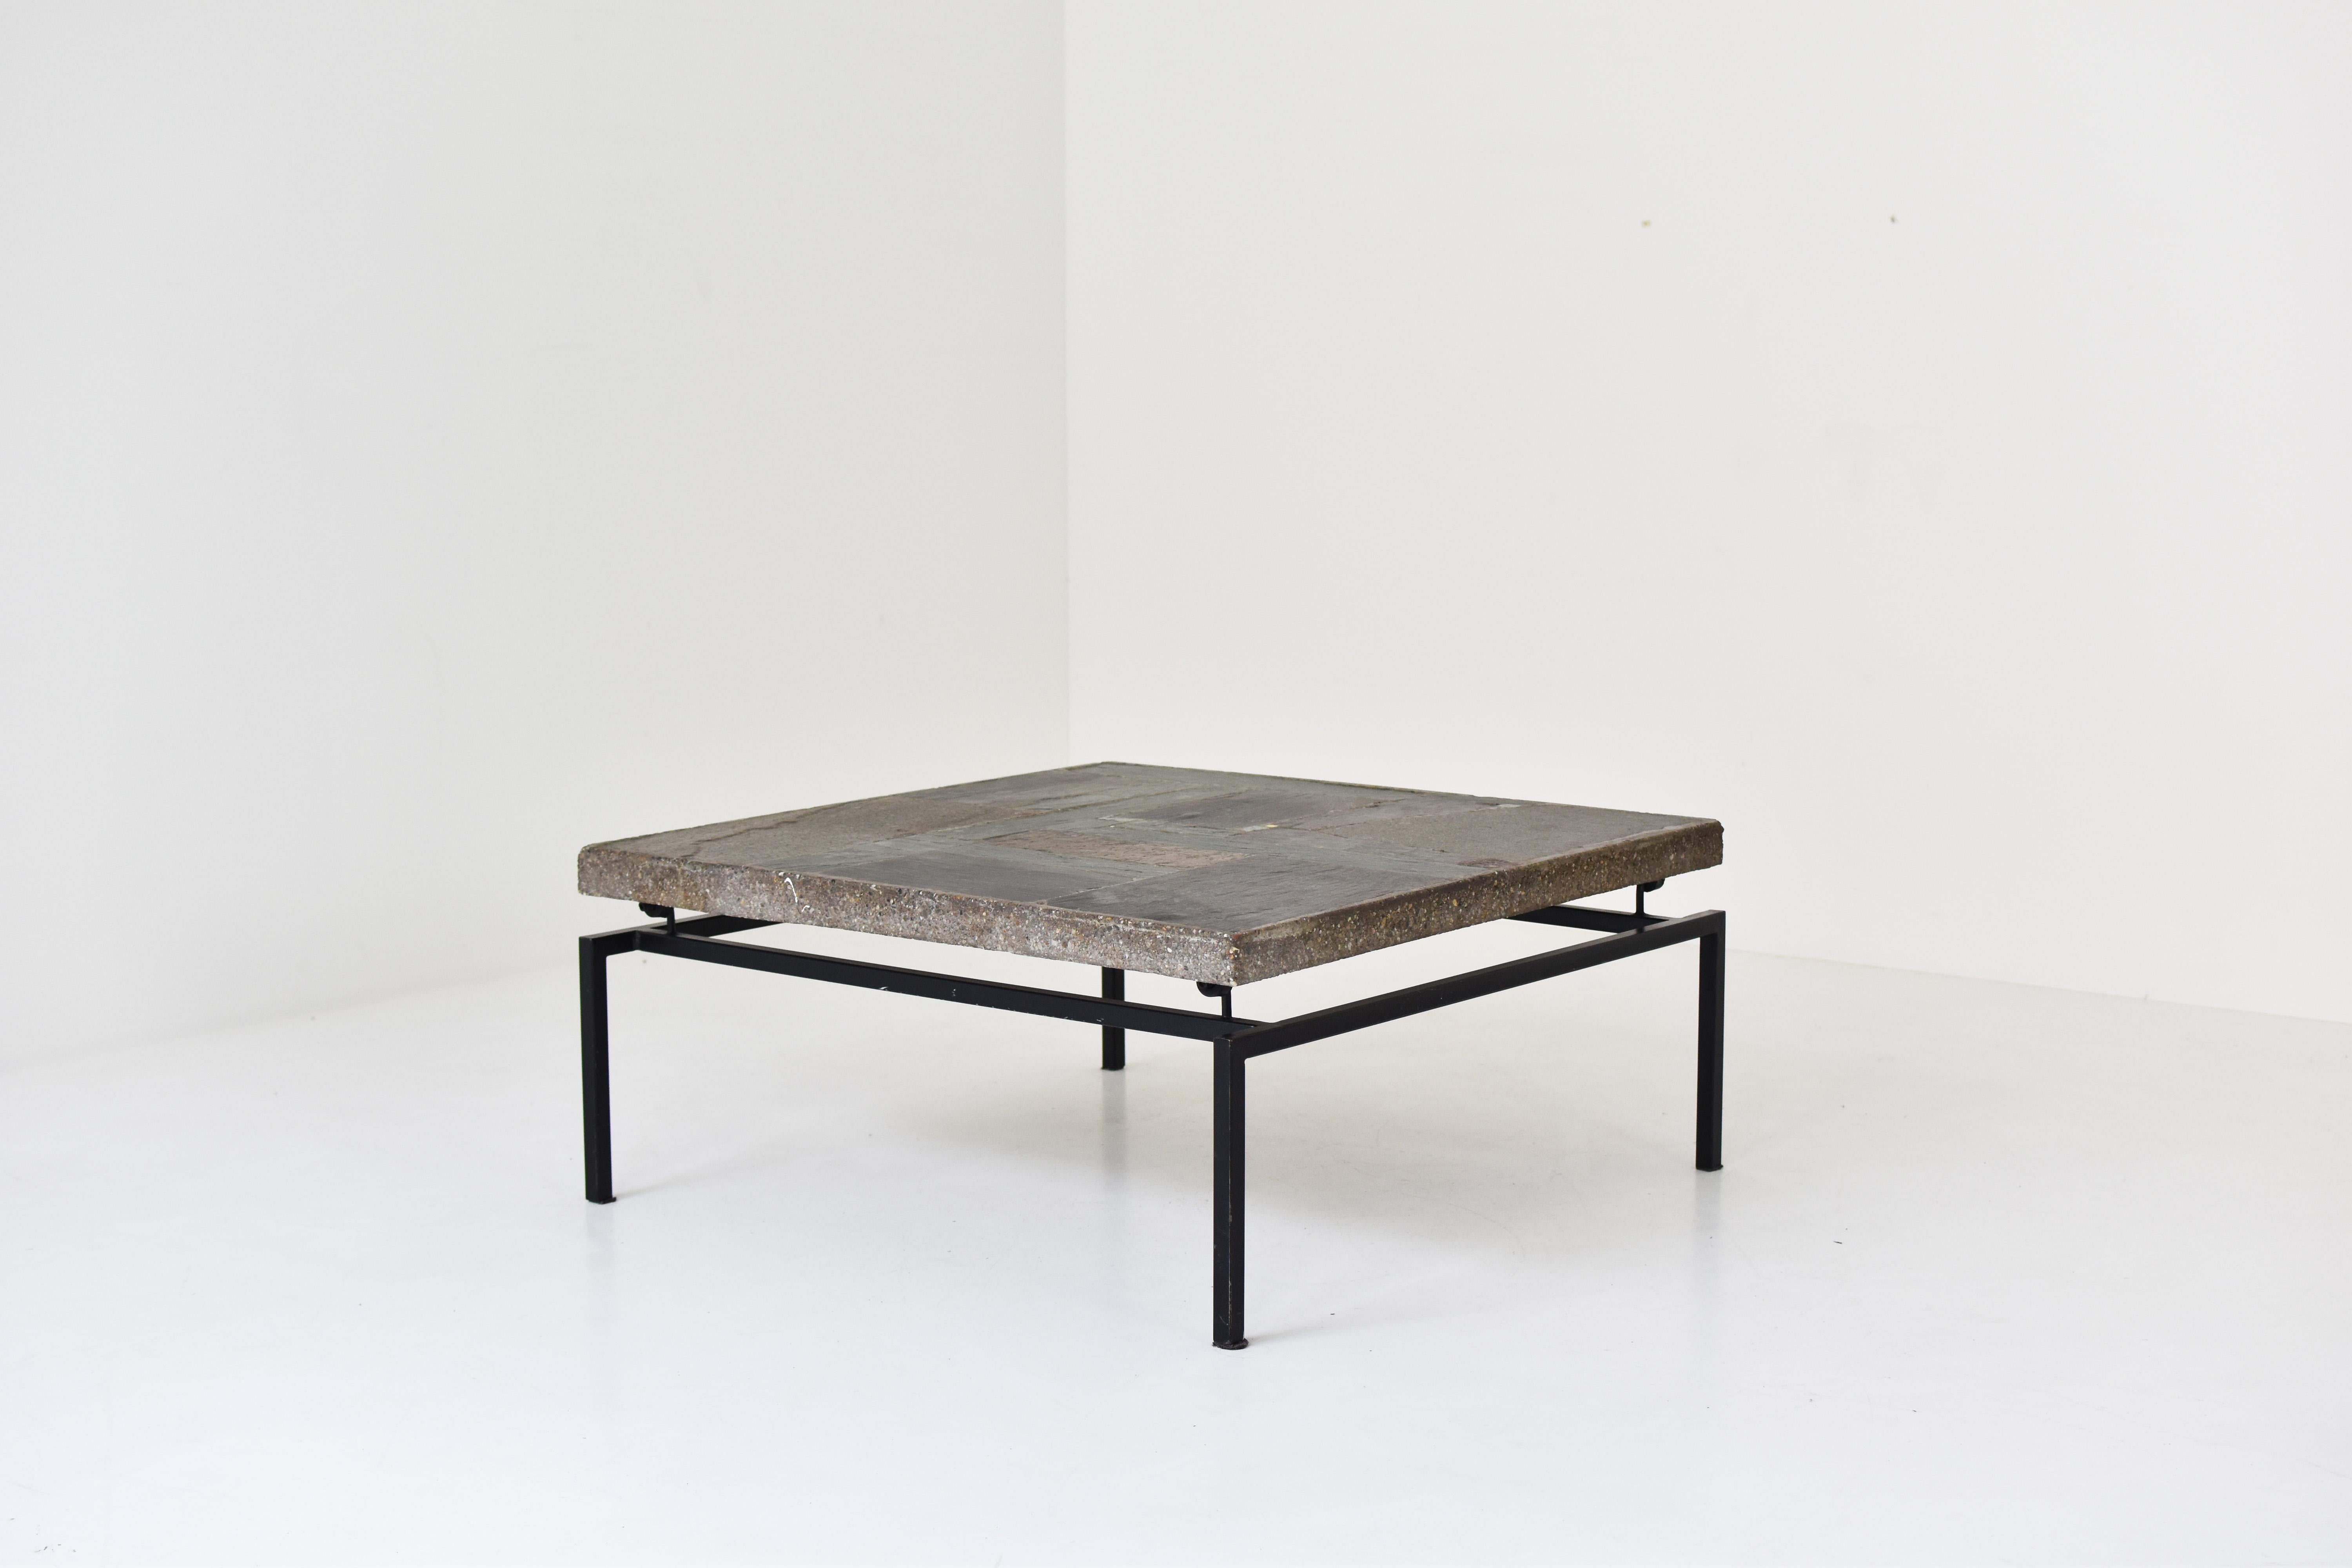 Early slate stone coffee table made by Paul Kingma and manufactured in his own atelier around Den Haag, The Netherlands 1960s. This square coffee table is a combination of ceramic and slate stone with copper inlays on a black lacquered metal base.